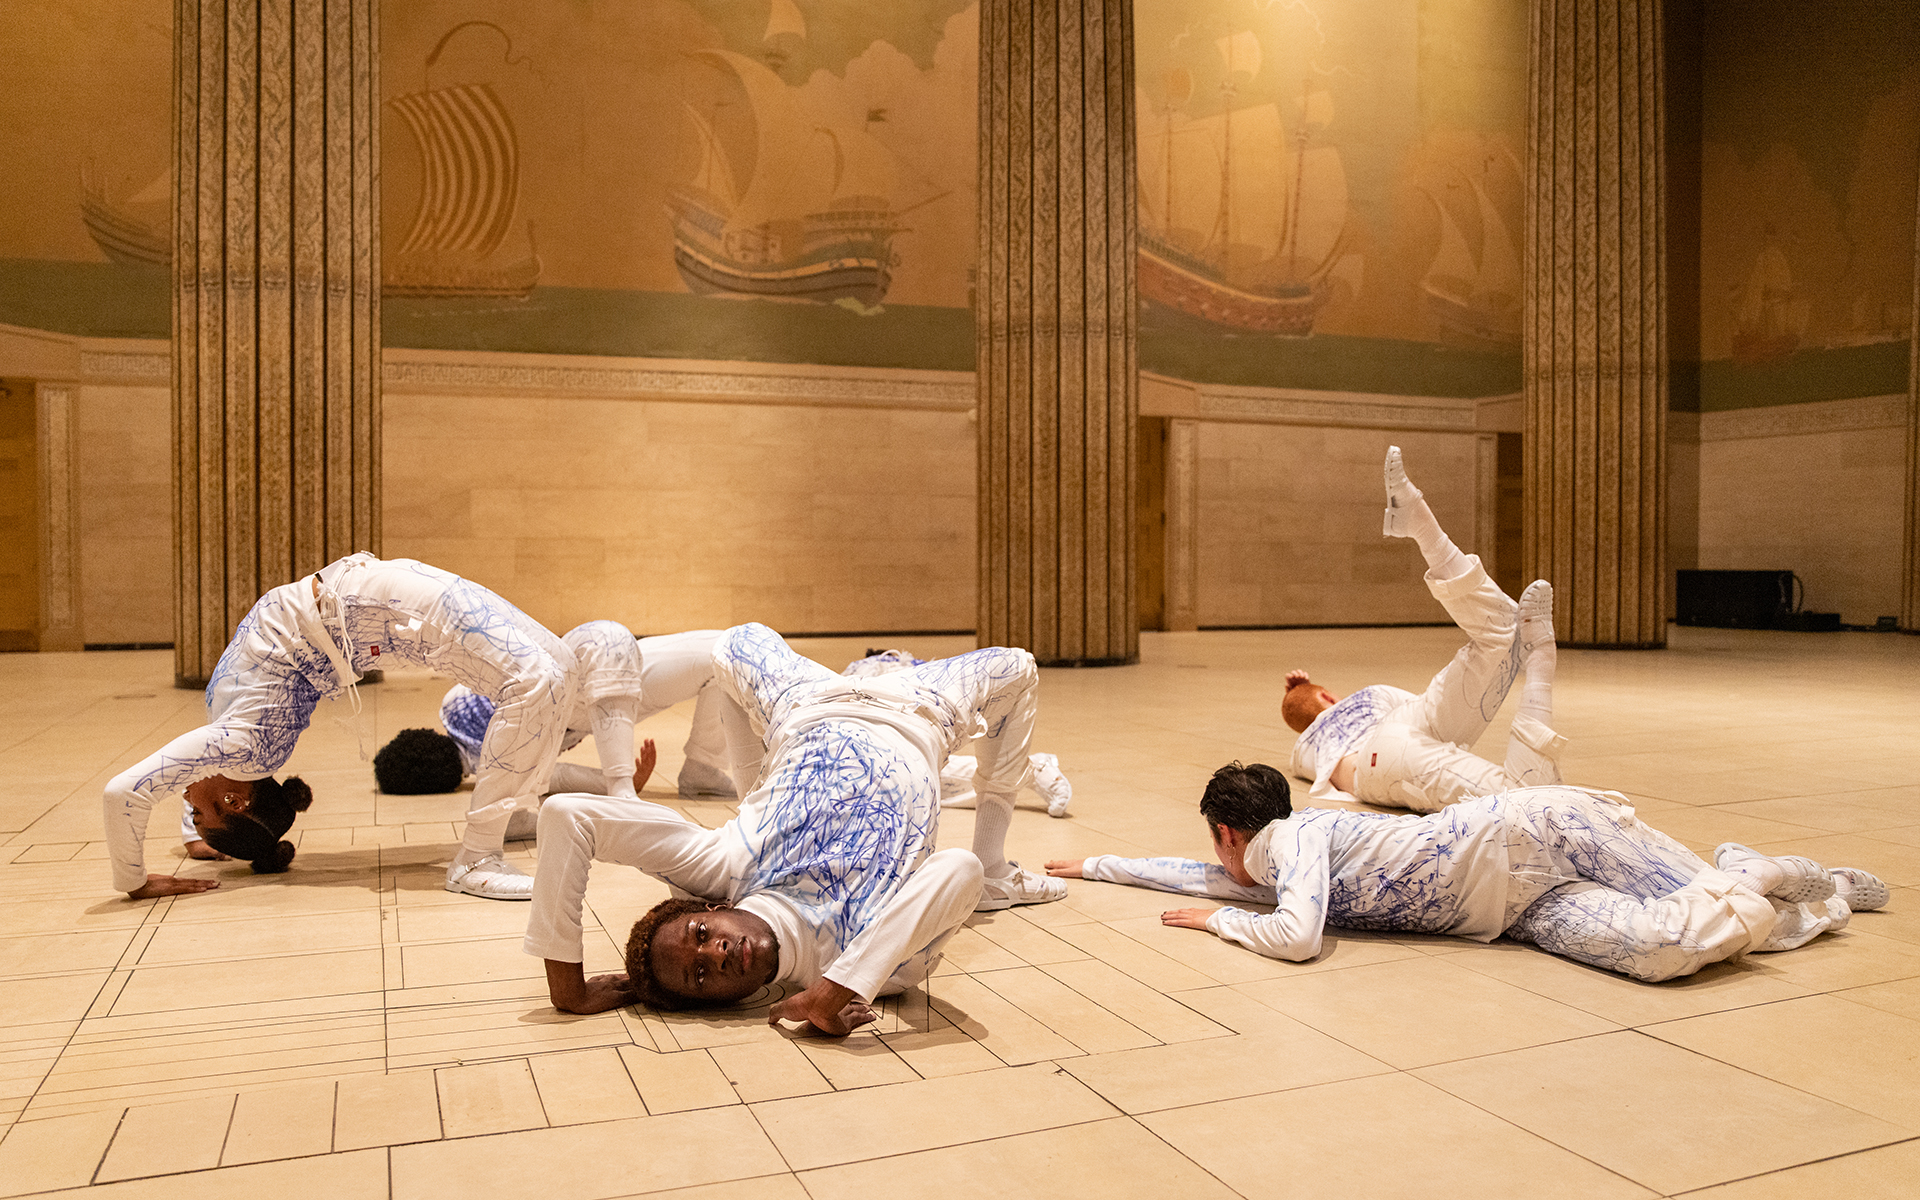 Performa Biennial Takes Over New York City with Three Weeks of